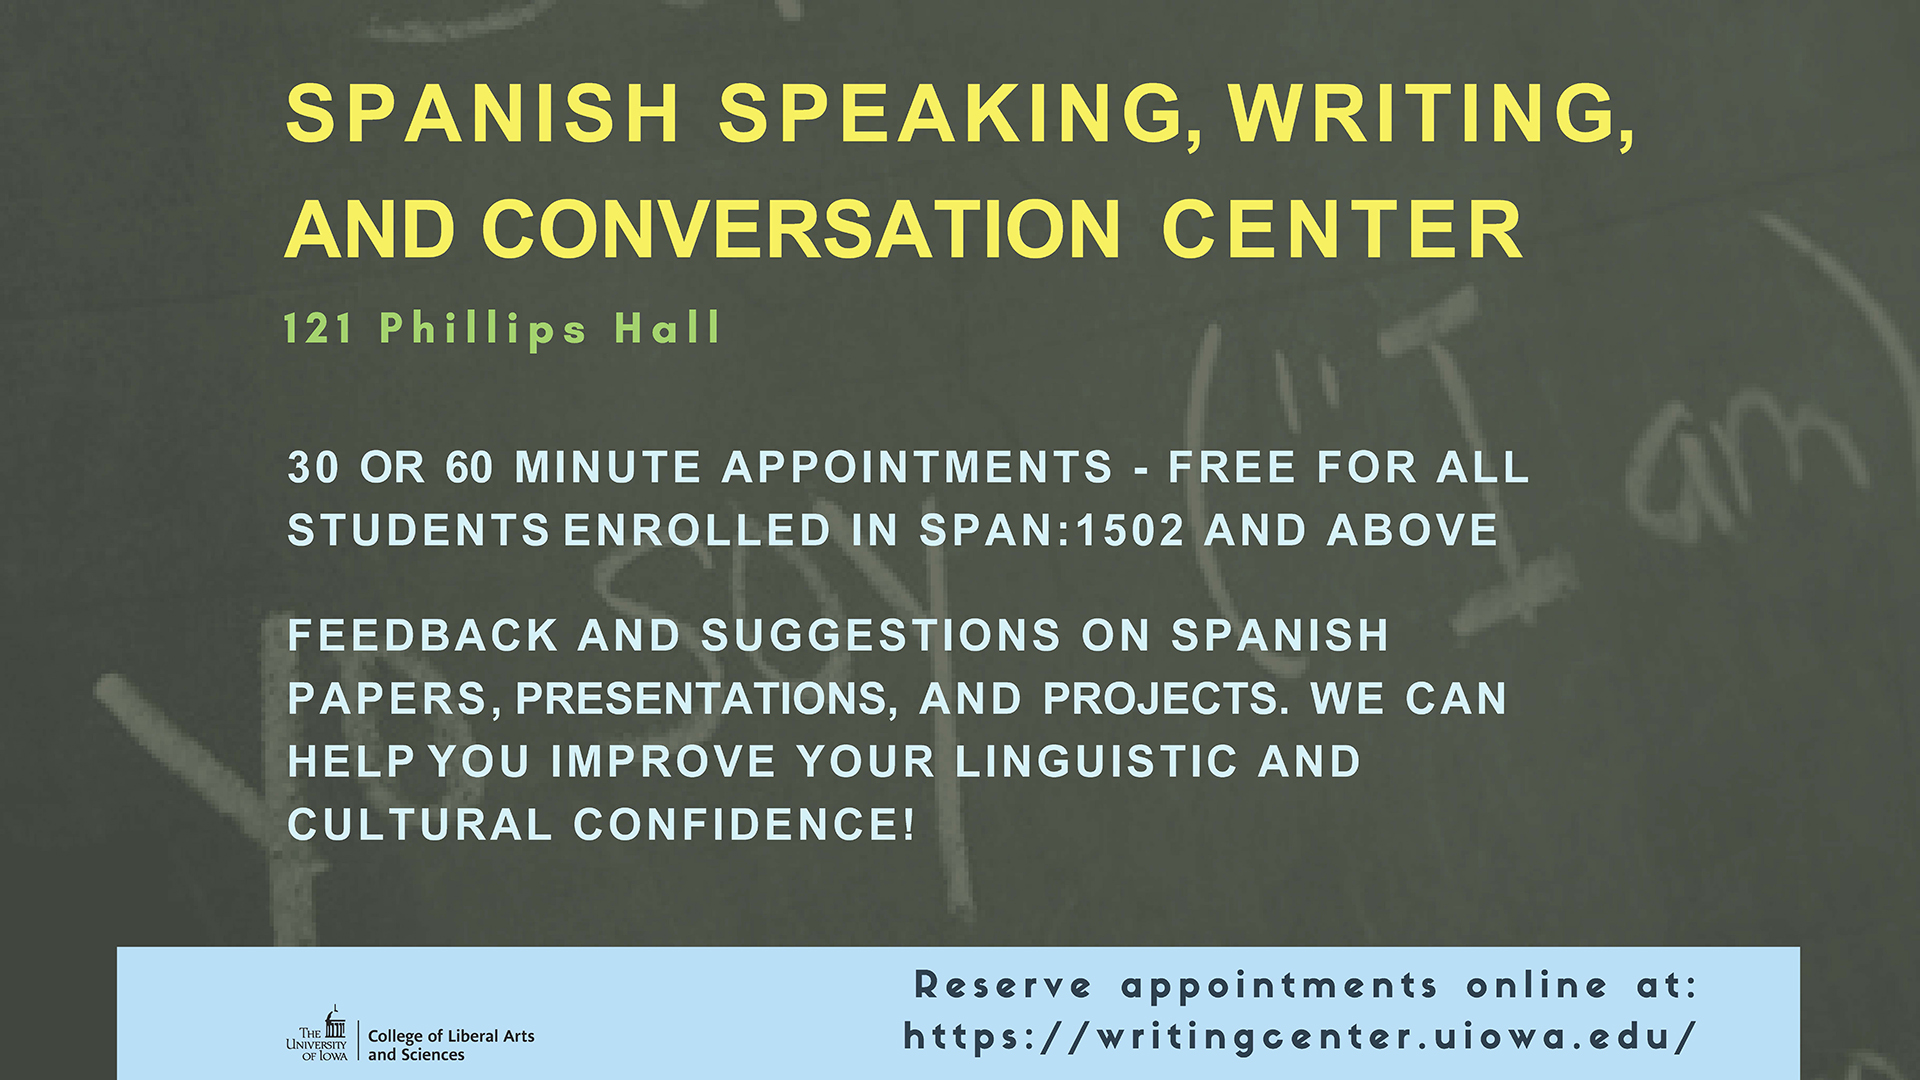 Spanish speaking, writing, and conversation center    121 Phillips Hall    30 or 60 minute appointments - Free for all students enrolled in SPAN:1502 and above    Feedback and suggestions on Spanish papers, presentations, and projects. We can help you improve your linguistic and cultural confidence!    The University of Iowa - College of Liberal Arts and Sciences    Reserve appointments online at: https://writingcenter.uiowa.edu/ 